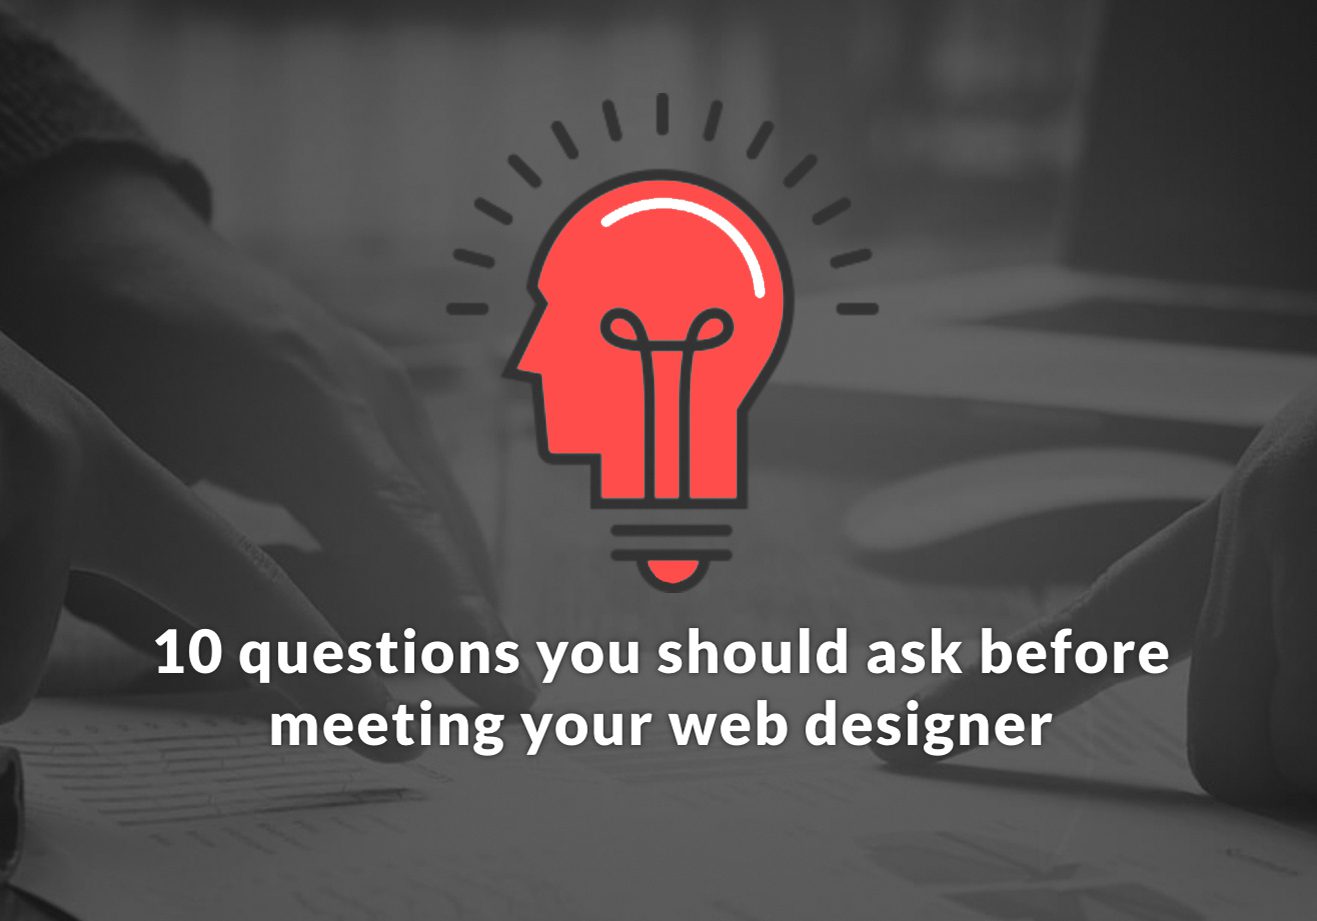 ​10 things to consider before meeting your web designer